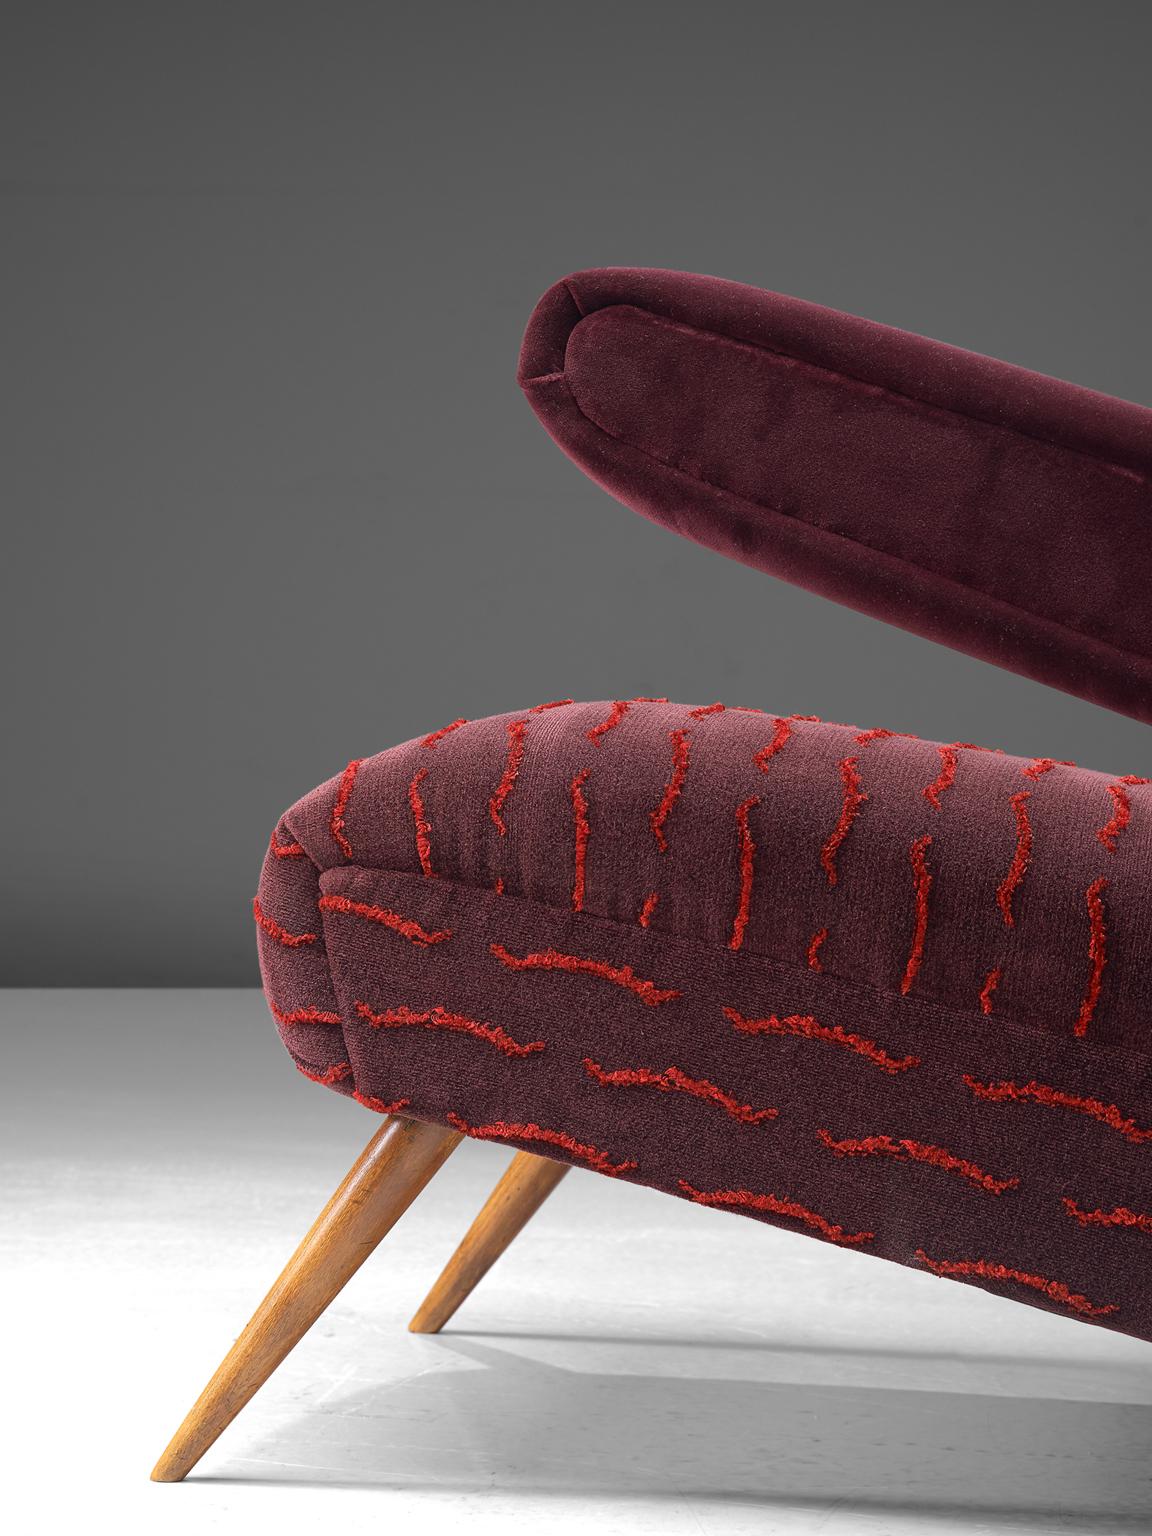 Rare Pair of Brazilian Armchairs Reupholstered in Luxurious Burgundy Velvets 1